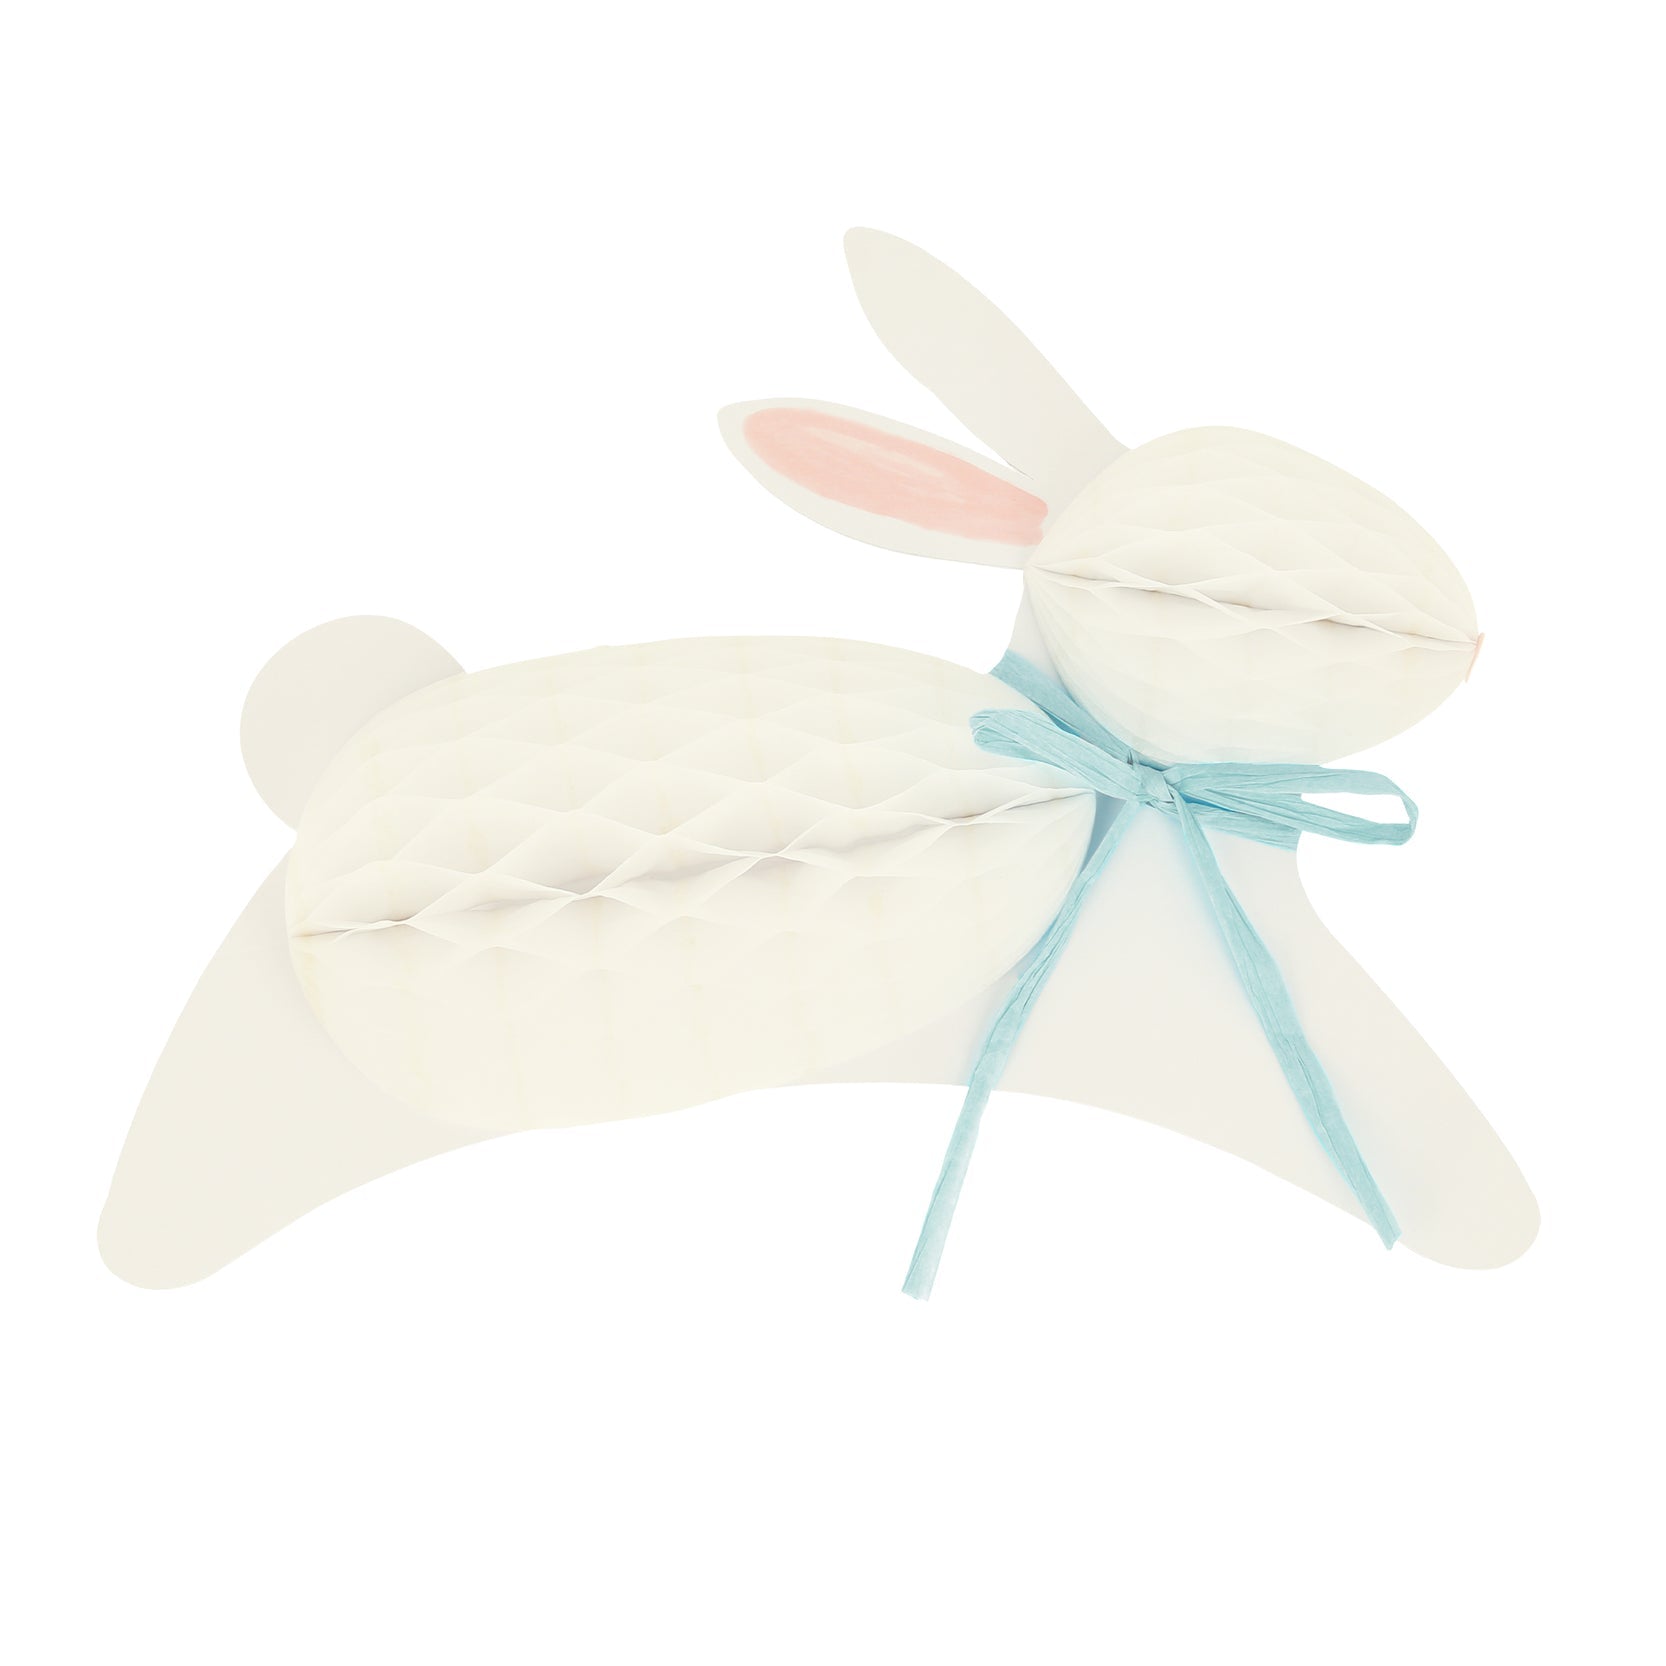 A white Bunny Honeycomb Decorations with a blue ribbon on a white background, perfect for Easter decorations. Brand: Meri Meri.